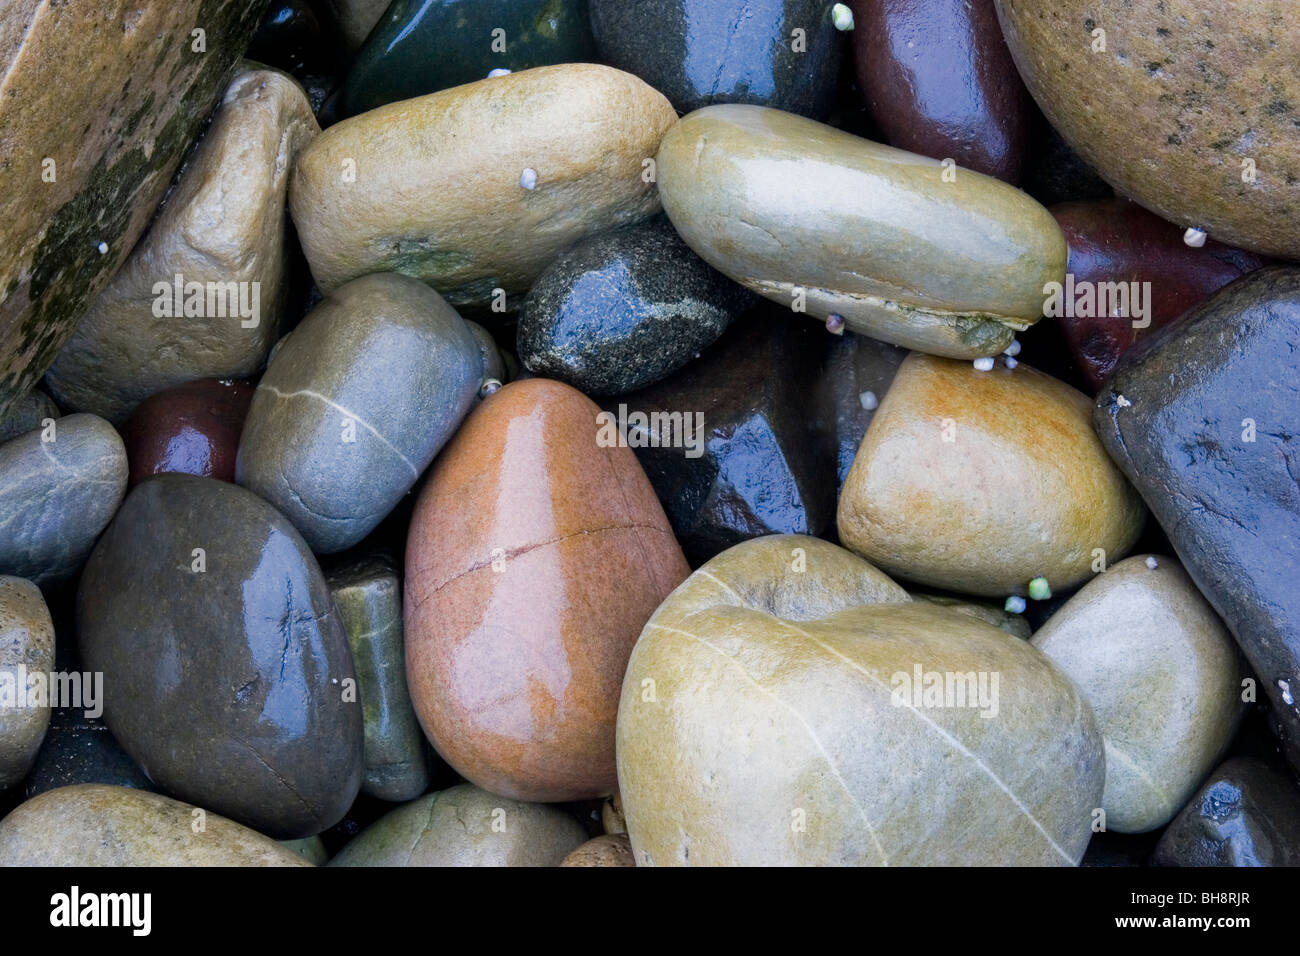 Glistening wet beach pebbles with small winkle snails Stock Photo